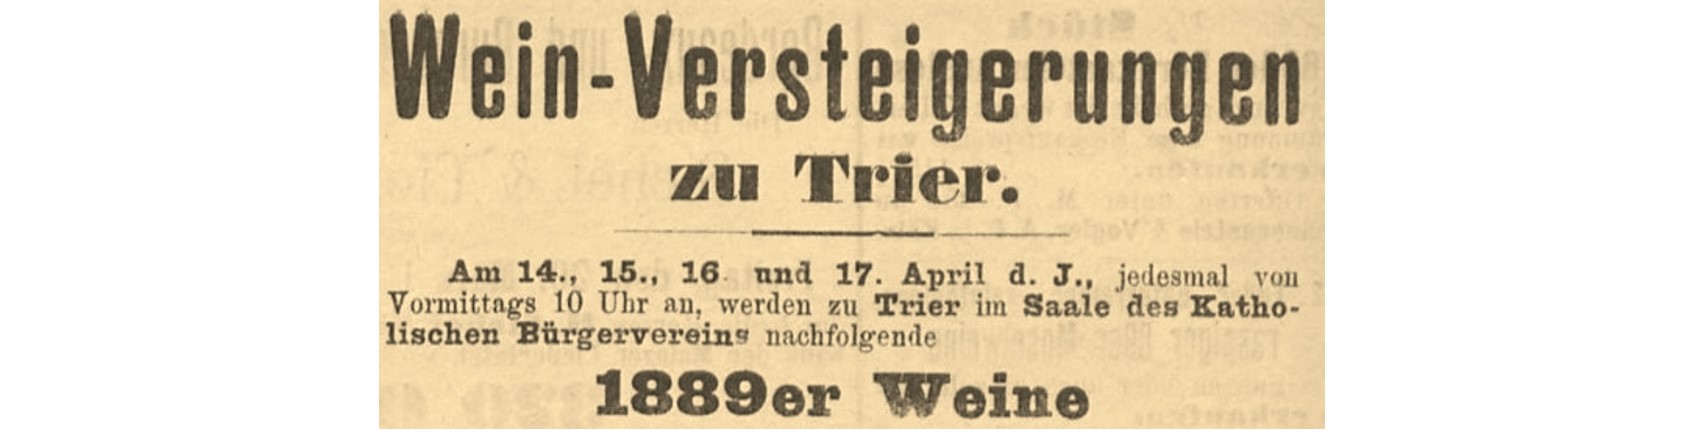 Trier Auctions | History | Announcement from 1889